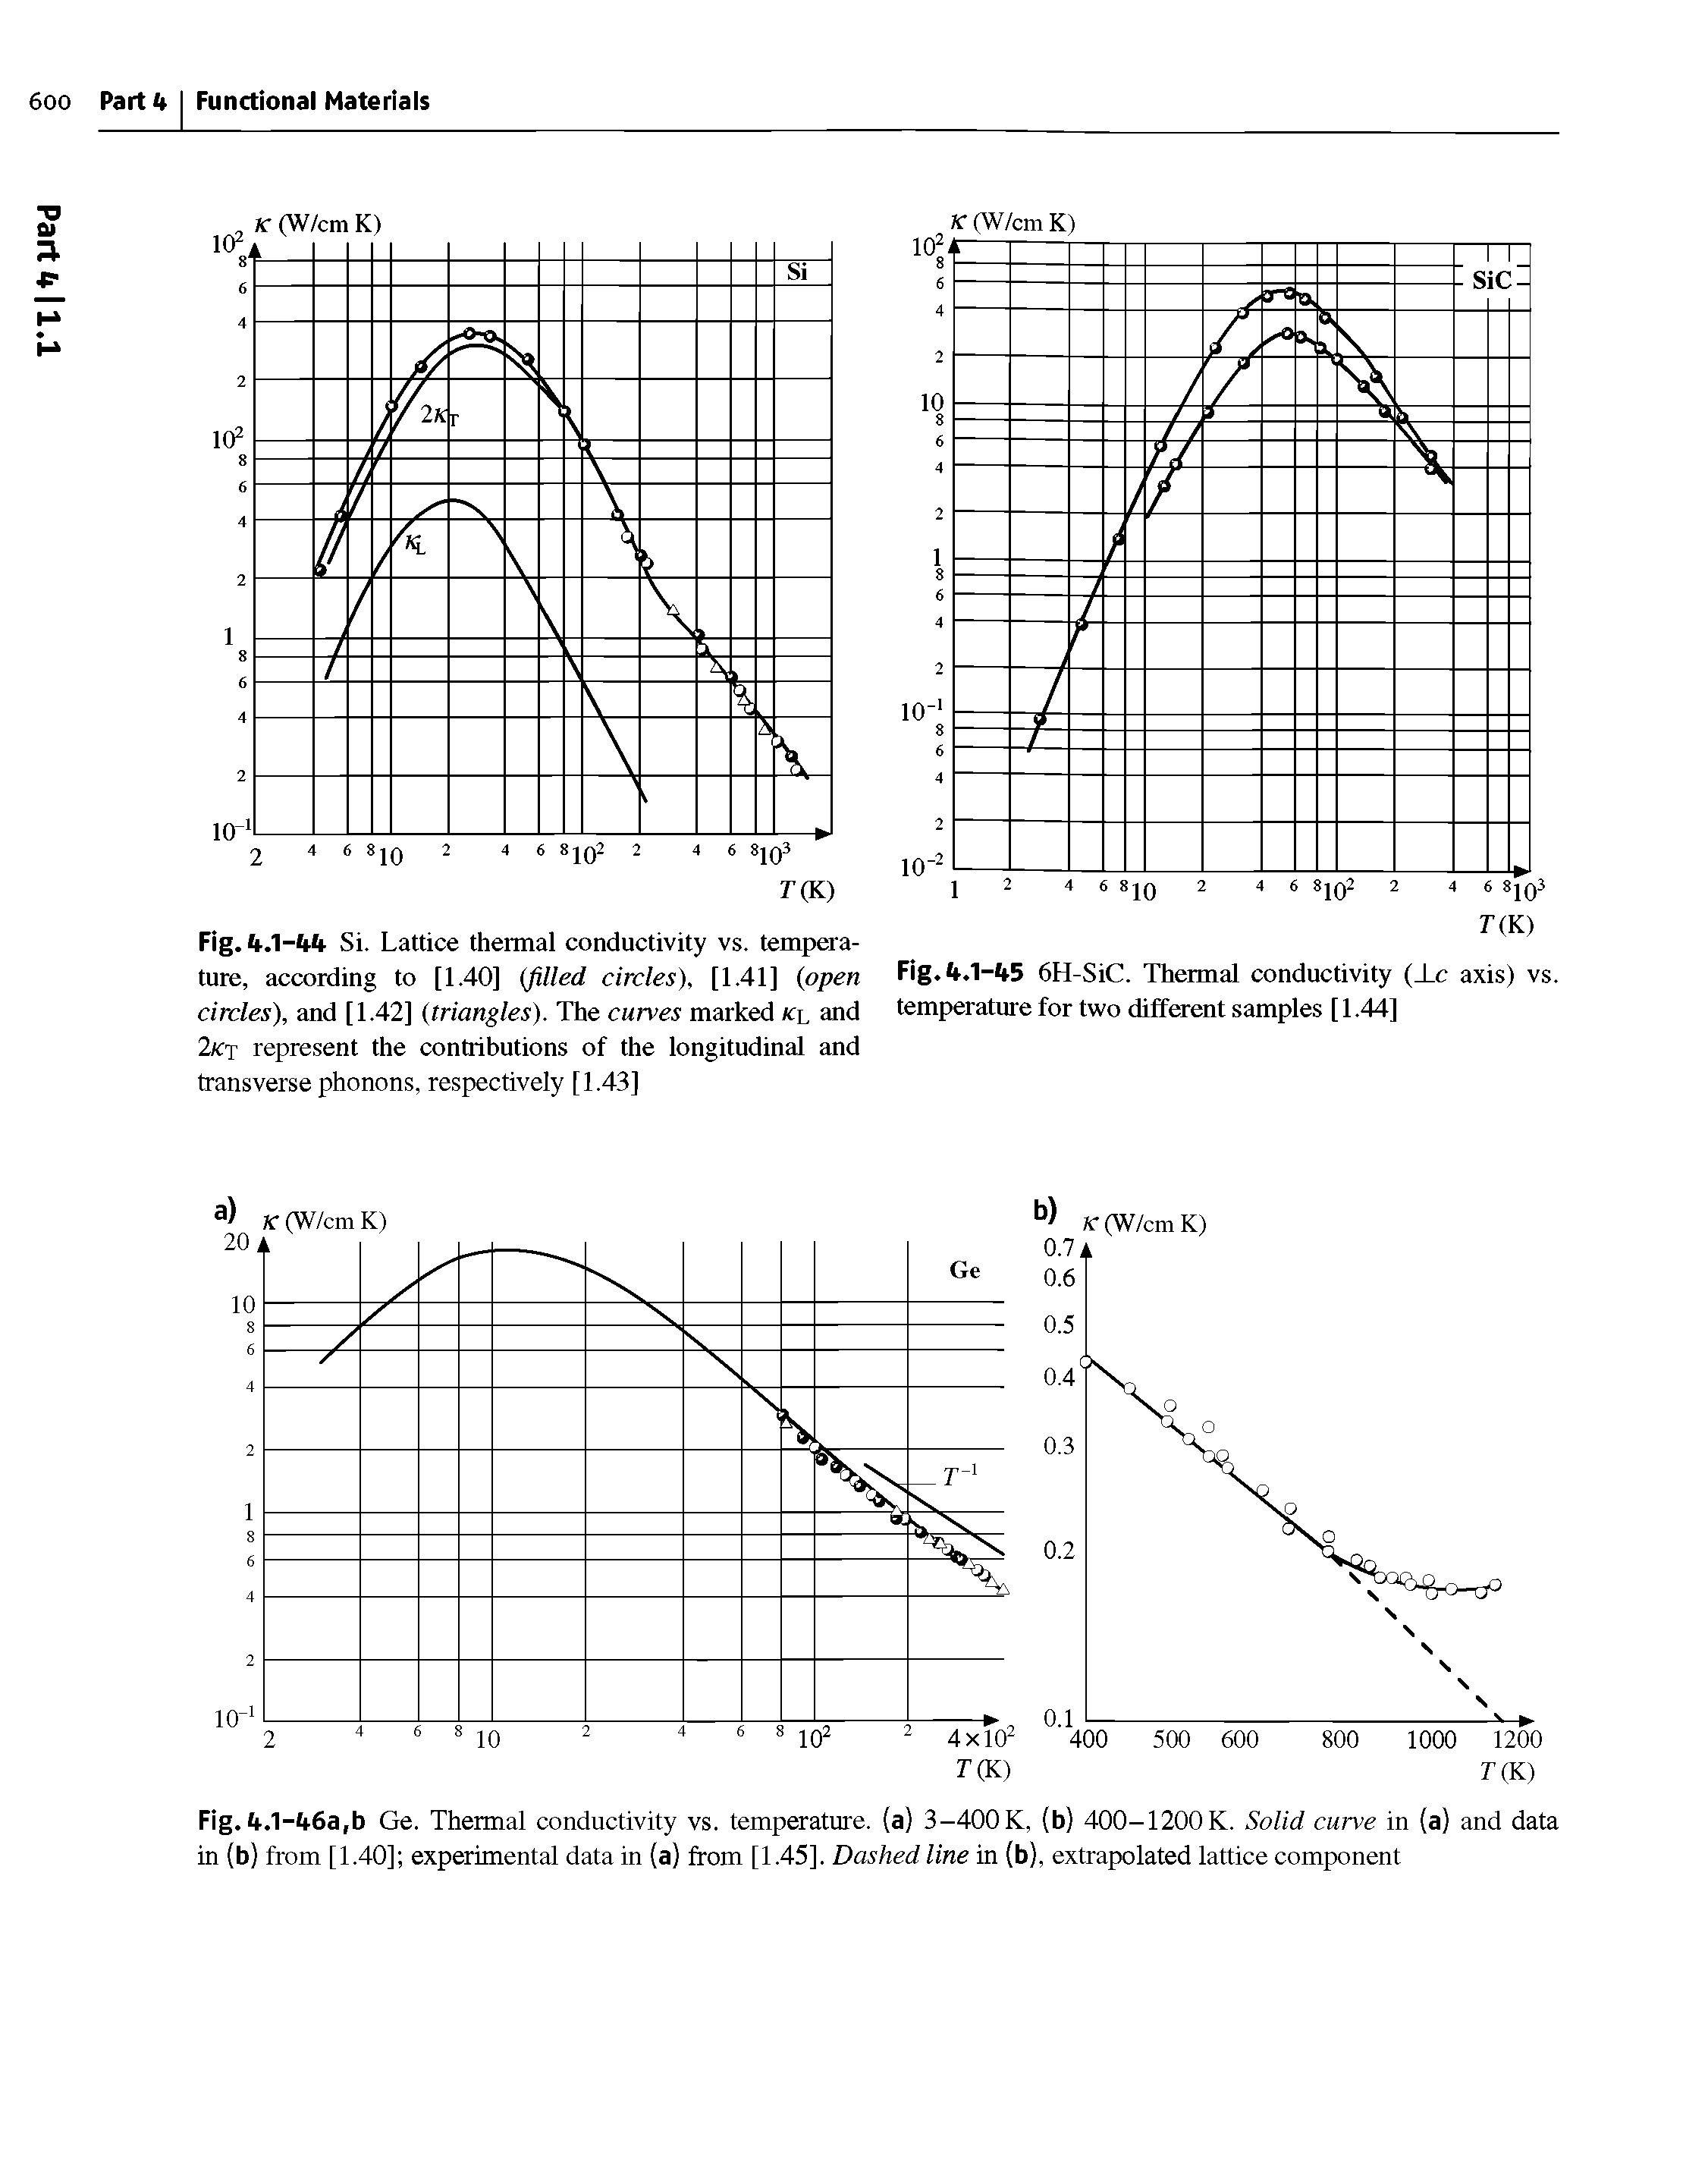 Fig. It.1-tt6a,b Ge. Thermal conductivity vs. temperature, (a) 3-400 K, (b) 400-1200 K. Solid curve in (a) and data in (b) from [1.40] experimental data in (a) from [1.45]. Dashed line in (b), extrapolated lattice component...